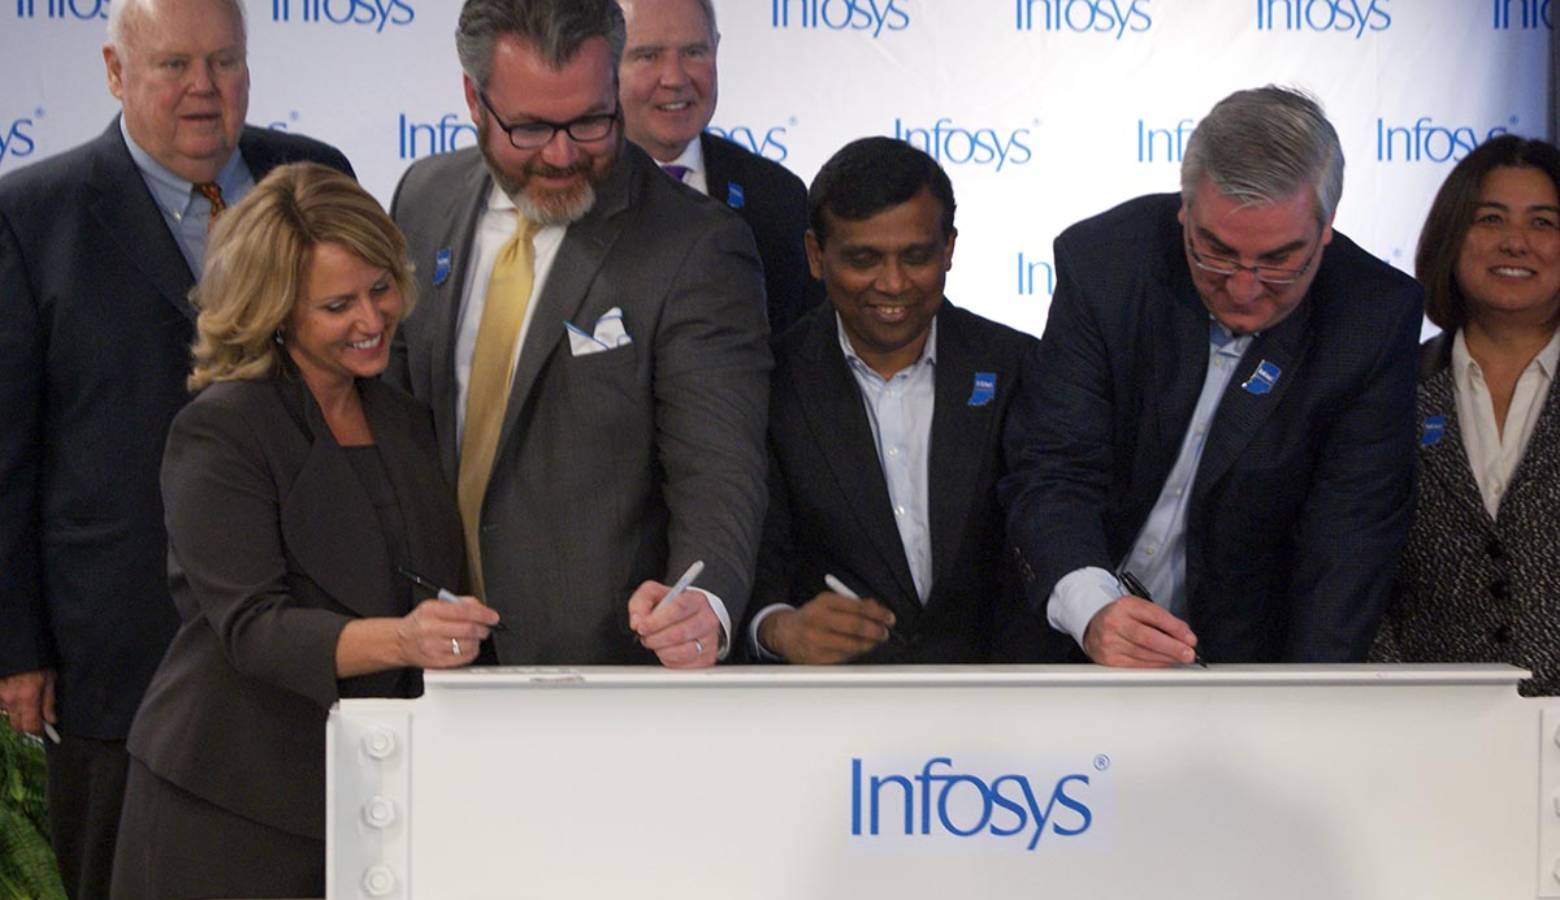 State and local officials along with Infosys company leaders sign a beam commemorating the progress to its U.S. Educational Center in Indianapolis. (Samantha Horton/IPB News)